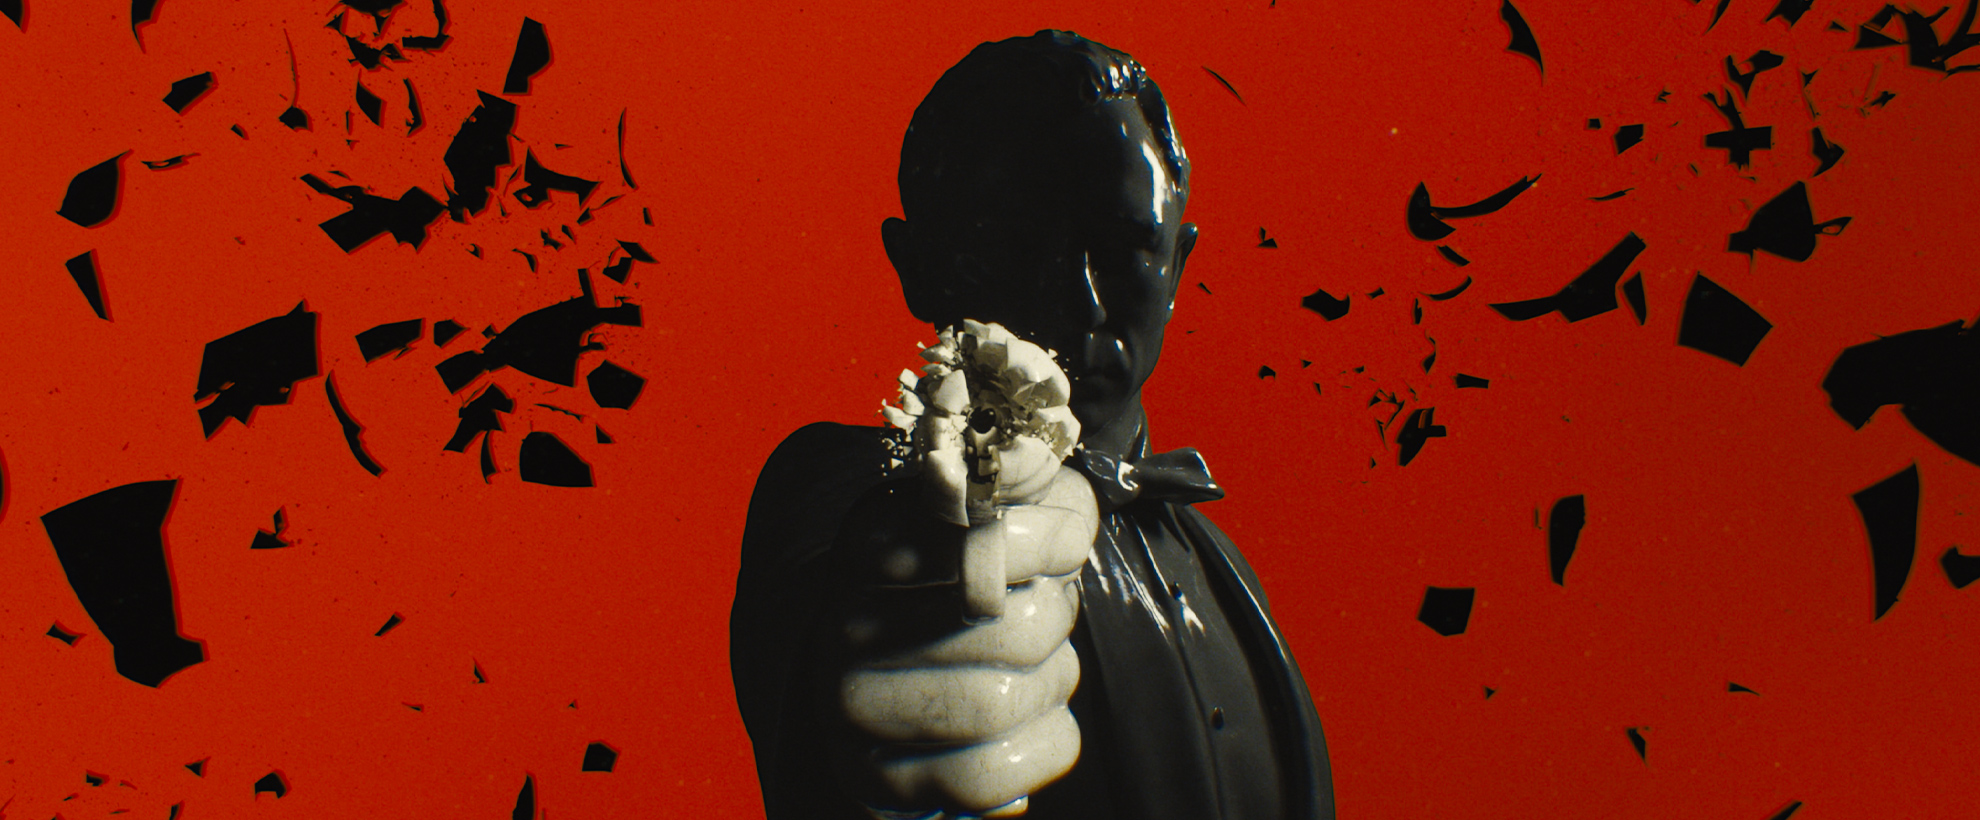 A statue of James Bond fires a gun into the camera, against a red background